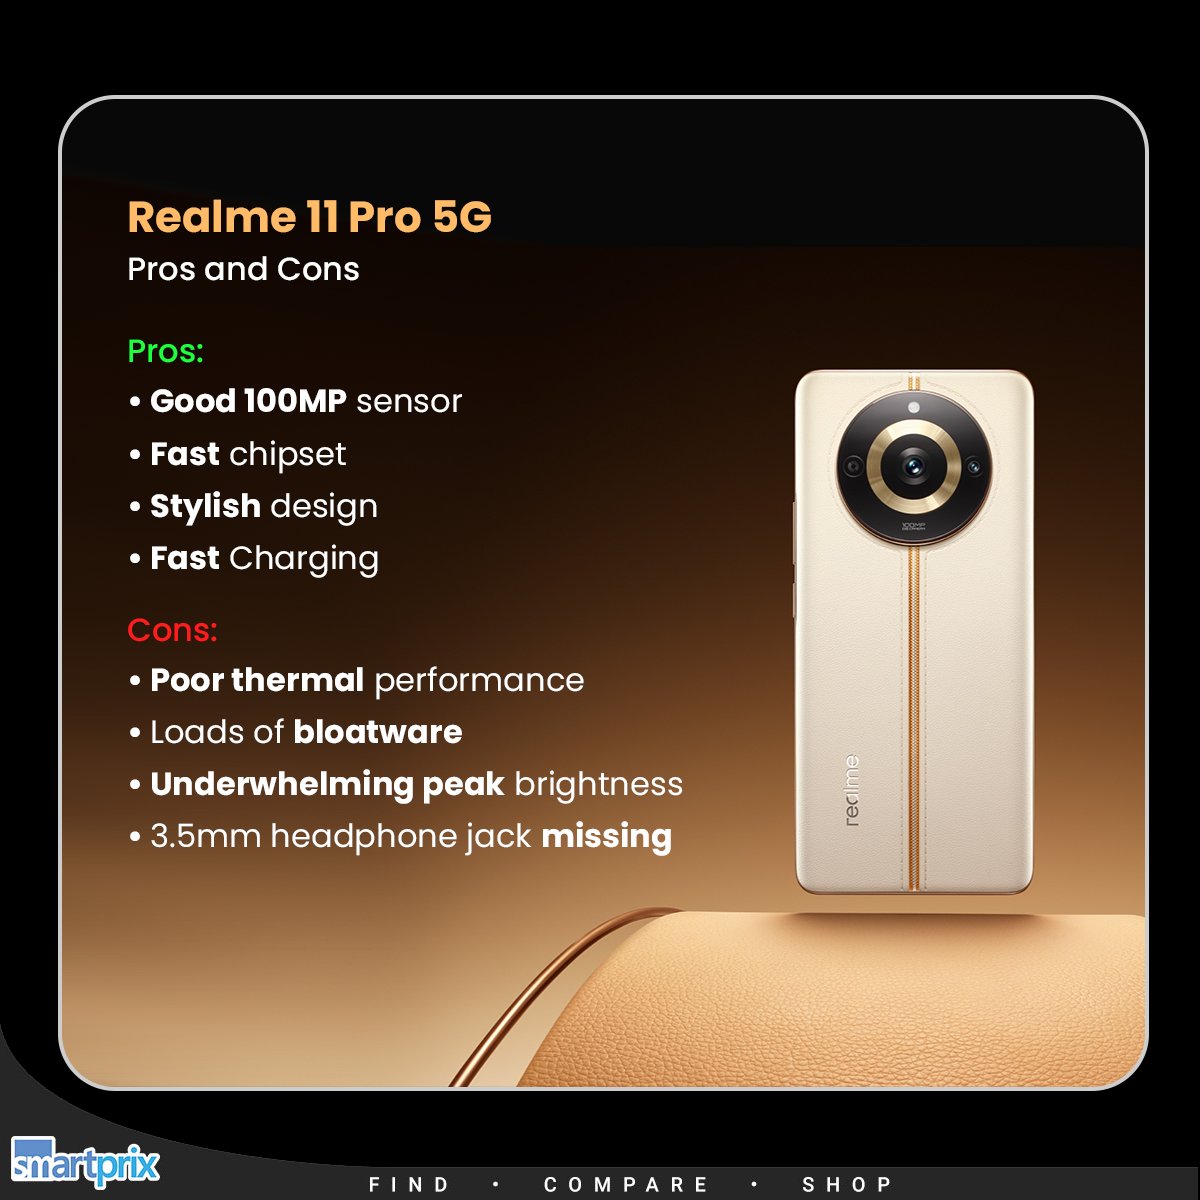 Pros and cons of Realme 11 Pro 5G smpx.to/pg1GNJ

#Realme #Realme11Pro #realme11ProSeries5G #realmeXSRK